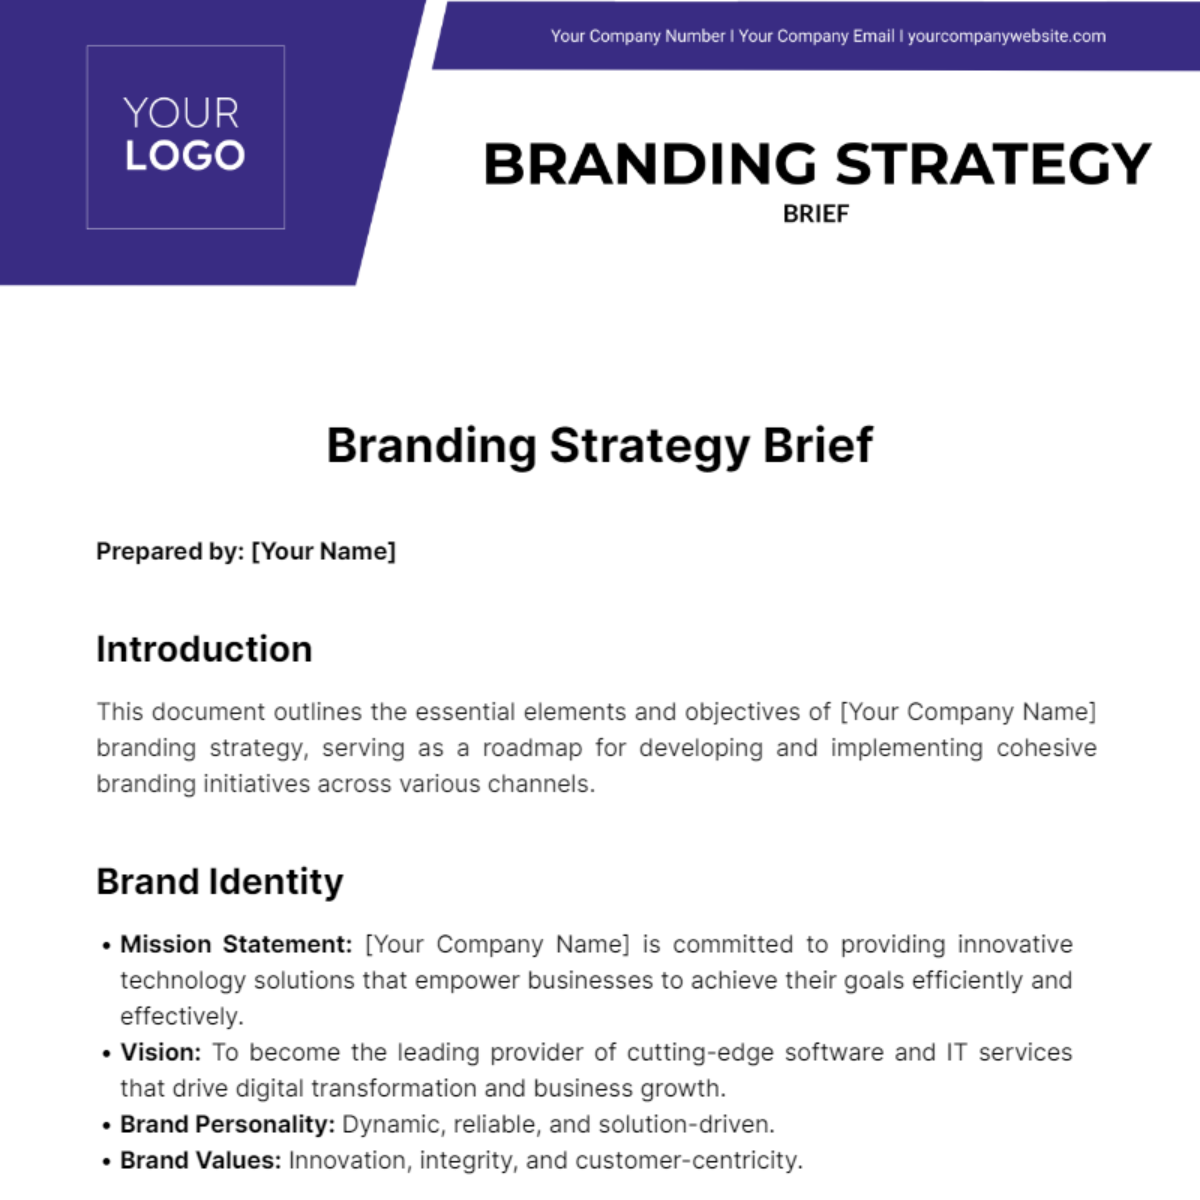 Branding Strategy Brief Template